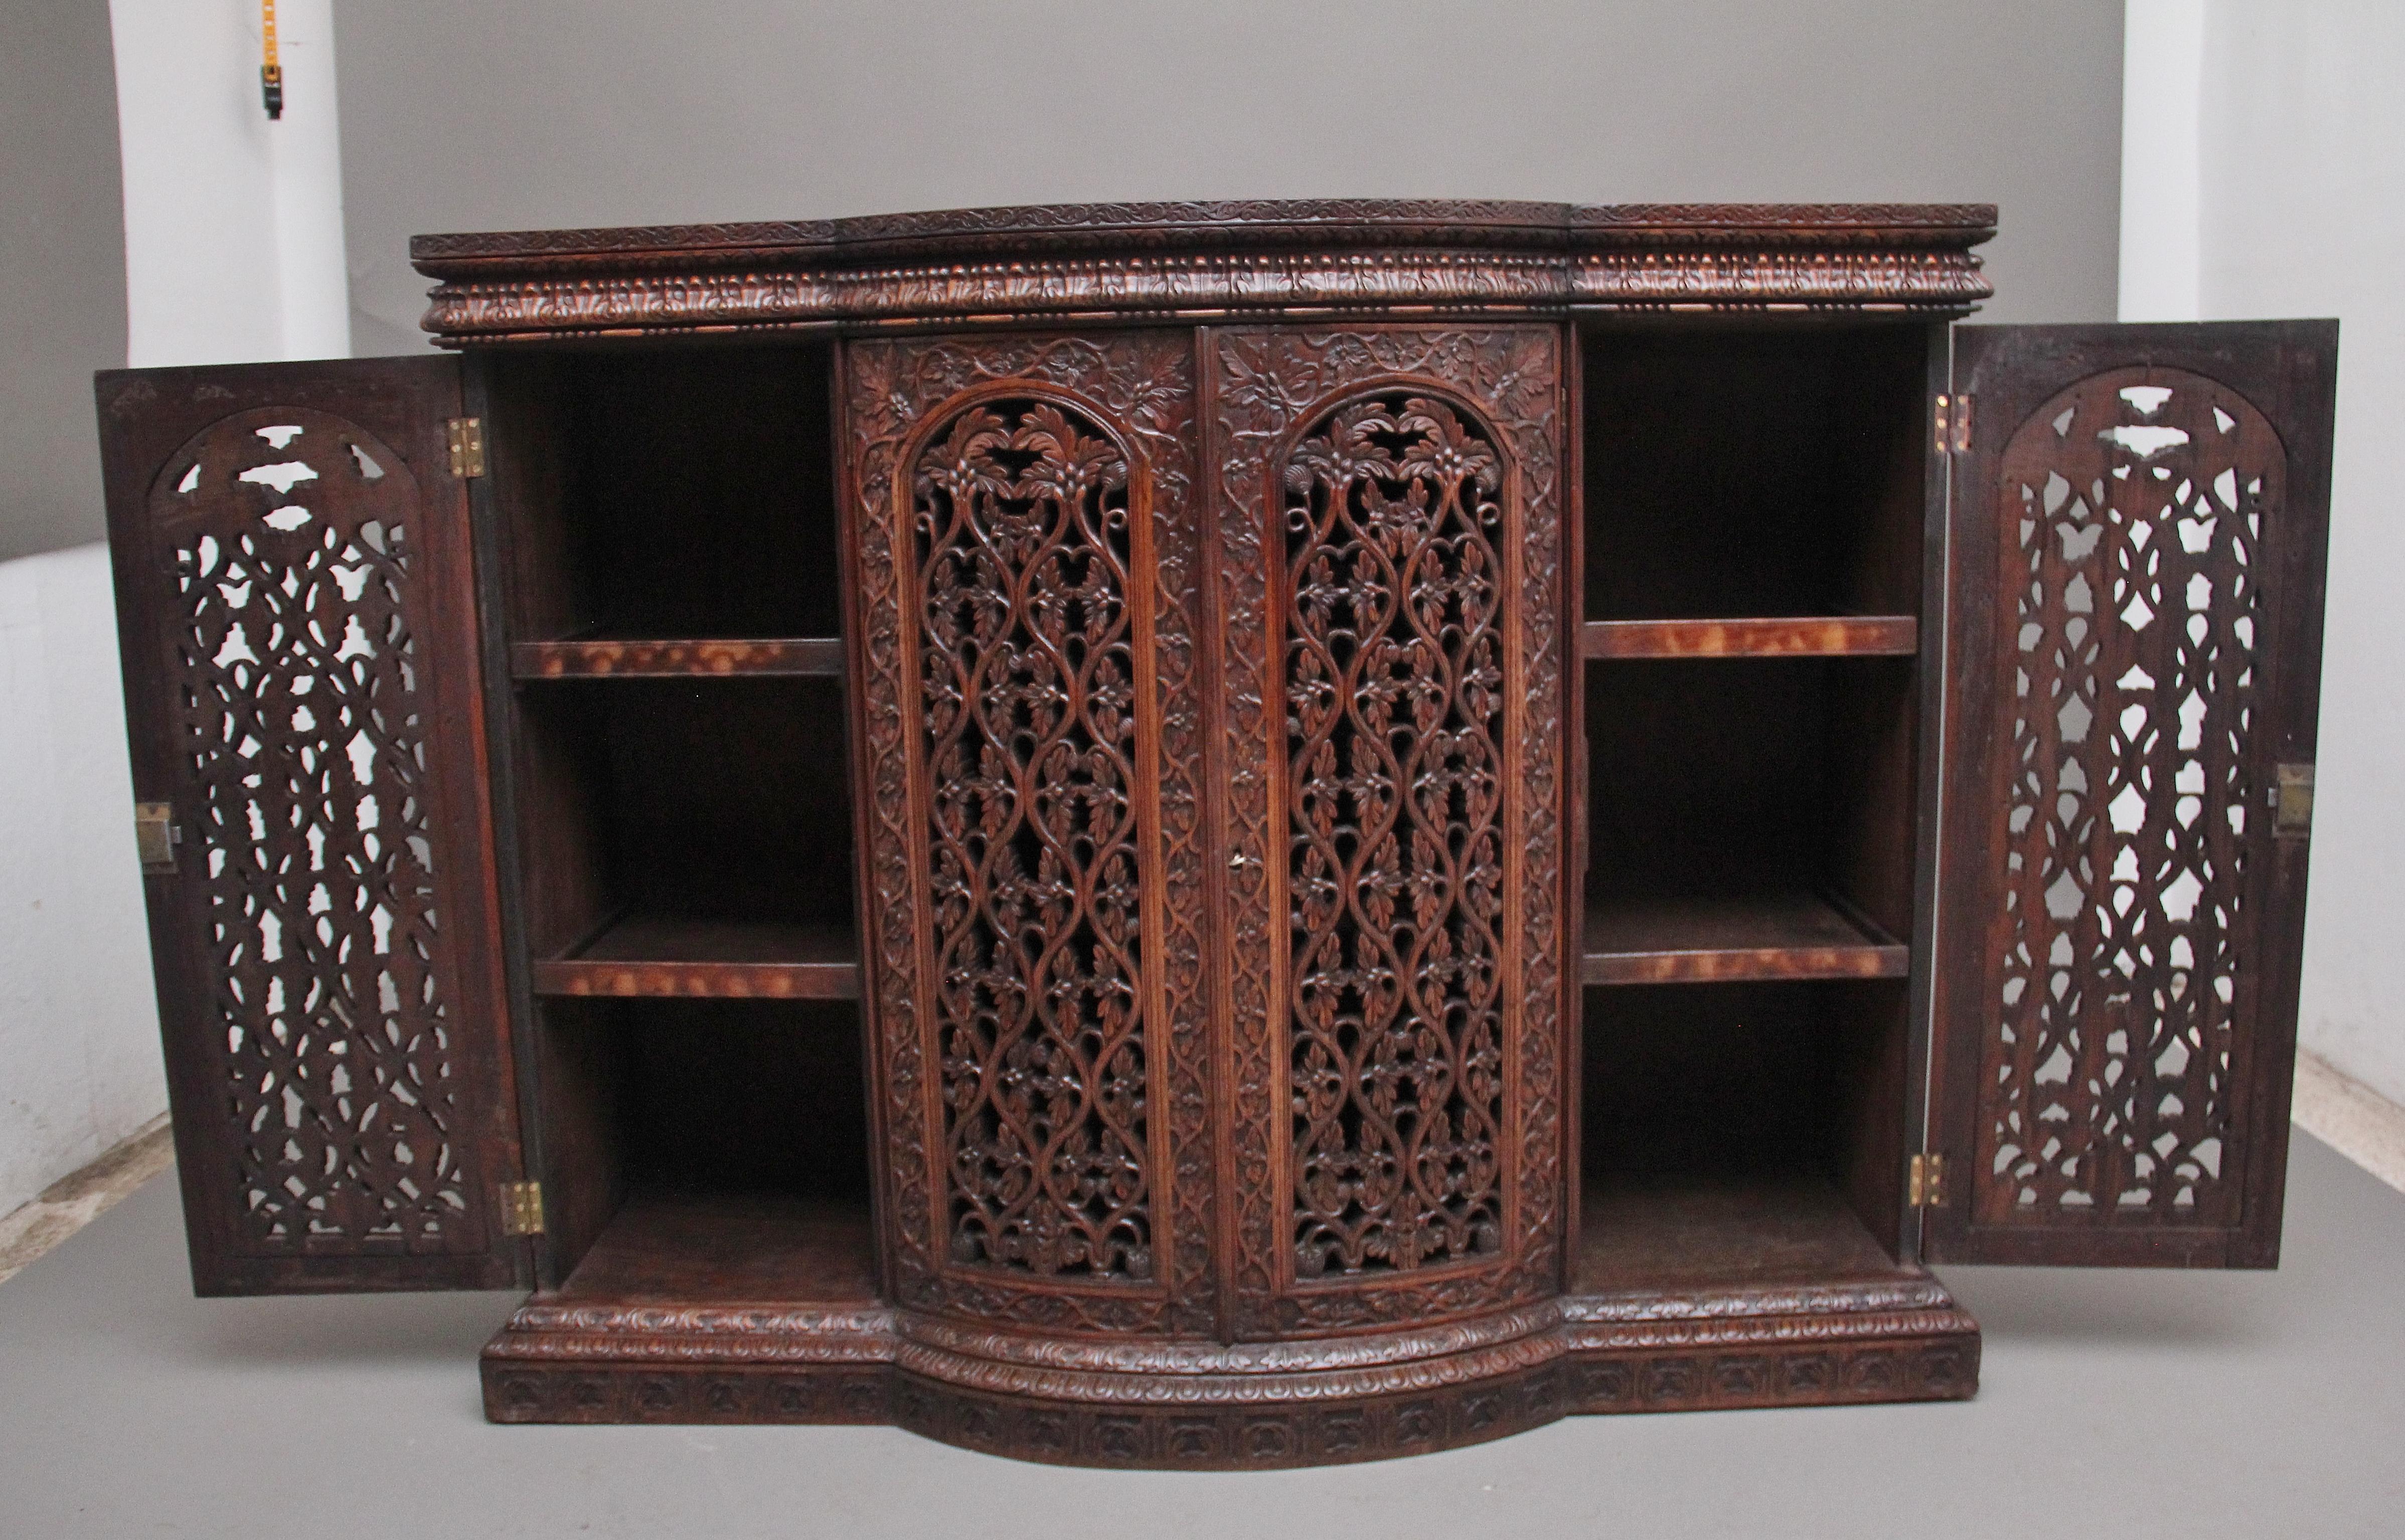 A superb quality 19th century carved Anglo- Indian teak cabinet, the lovely figured shaped top above a shaped frieze with acanthus leaf carving, with four doors below opening to reveal two shelves inside each section, the central doors being bow